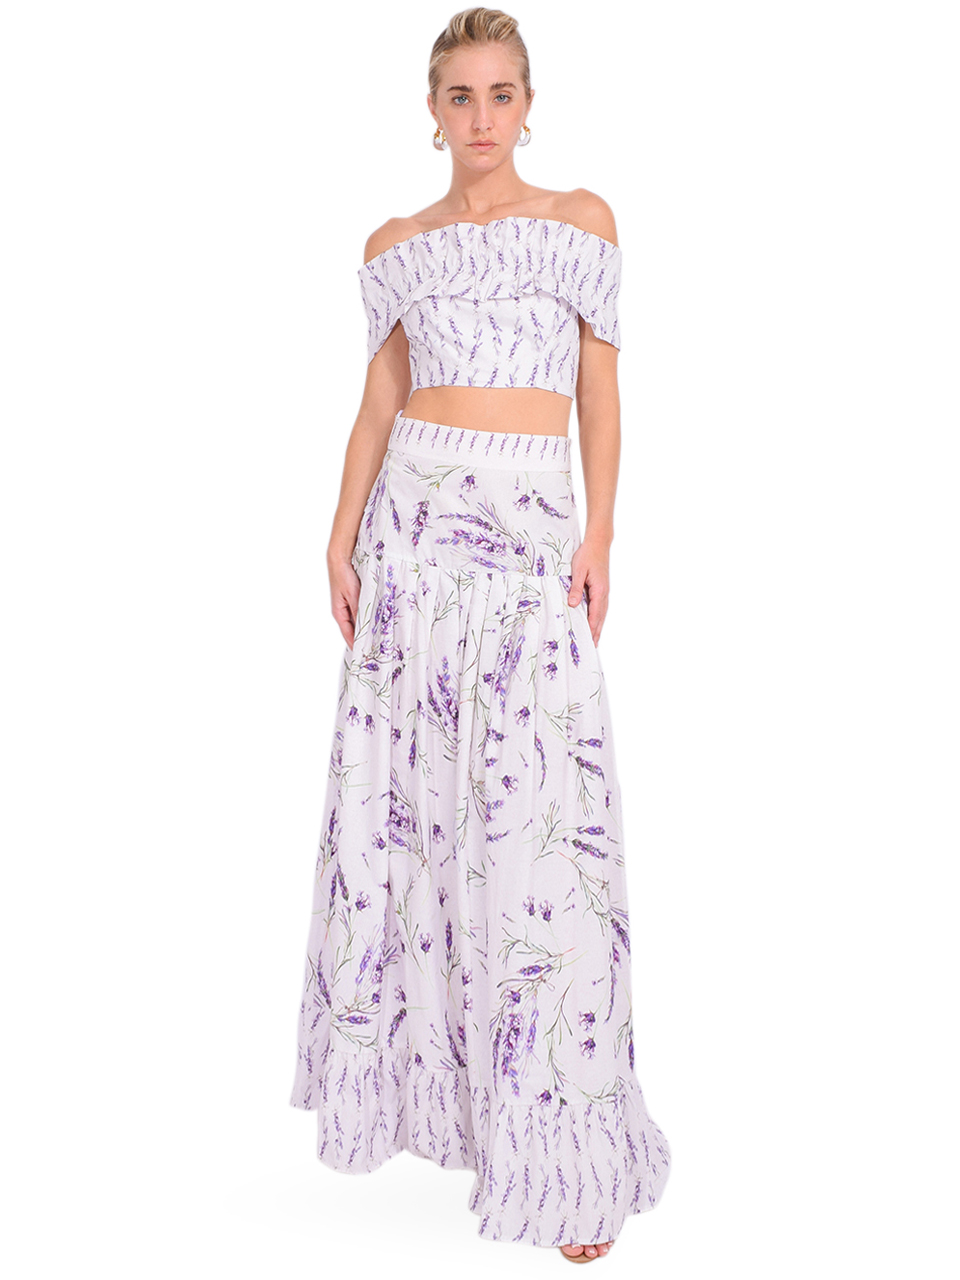 LALIBELA Belle Top in Lavender Print Full Outfit 
